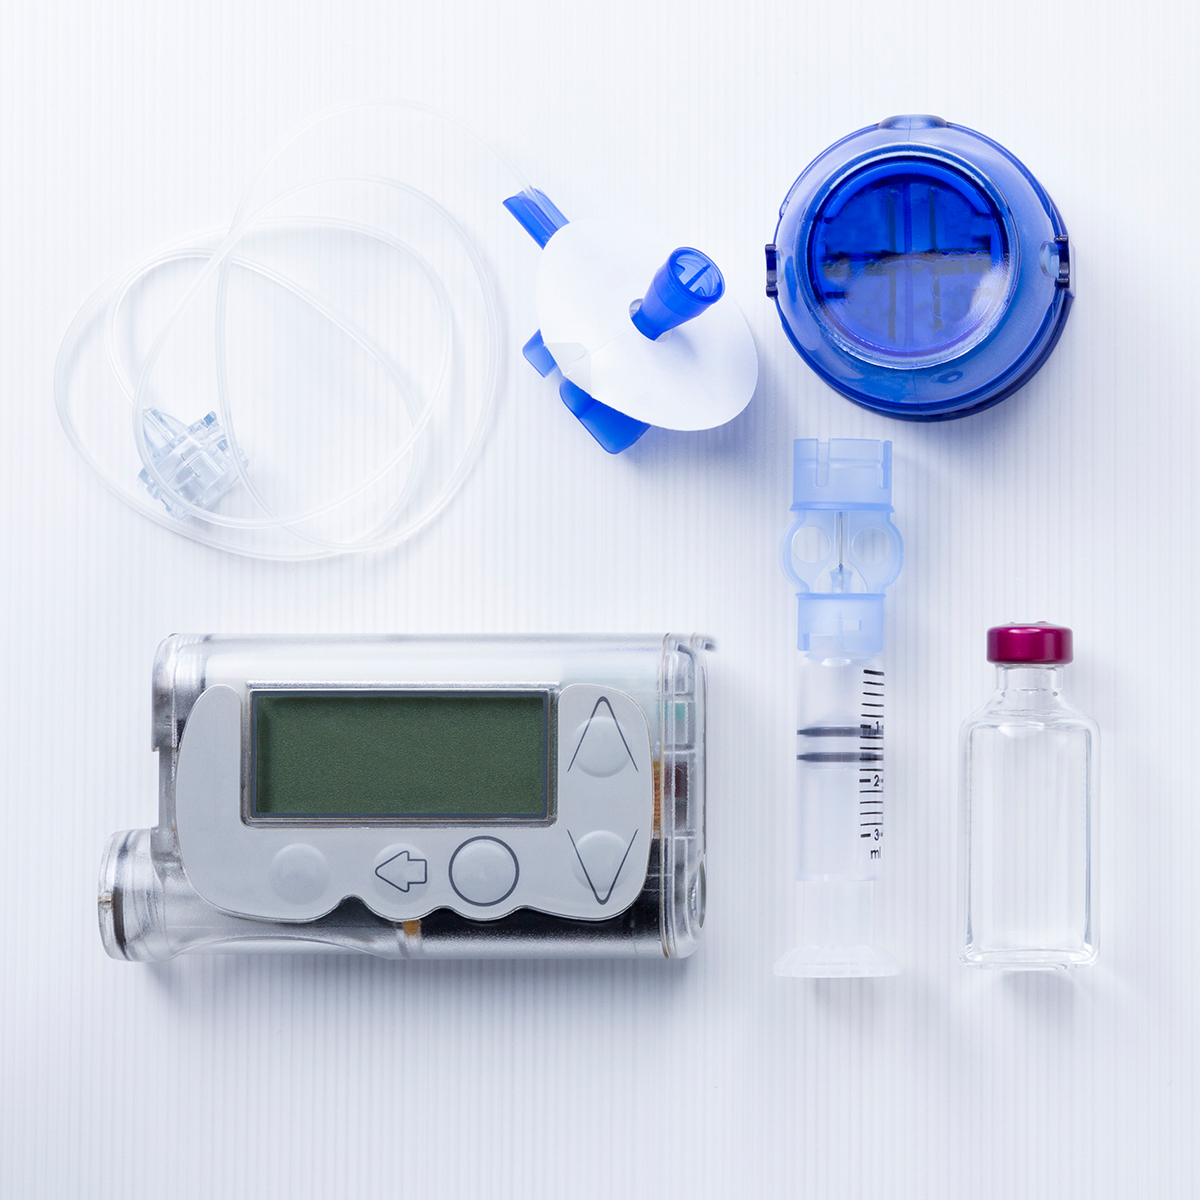 An insulin pump is a small, computerized device that delivers insulin continuously throughout the day